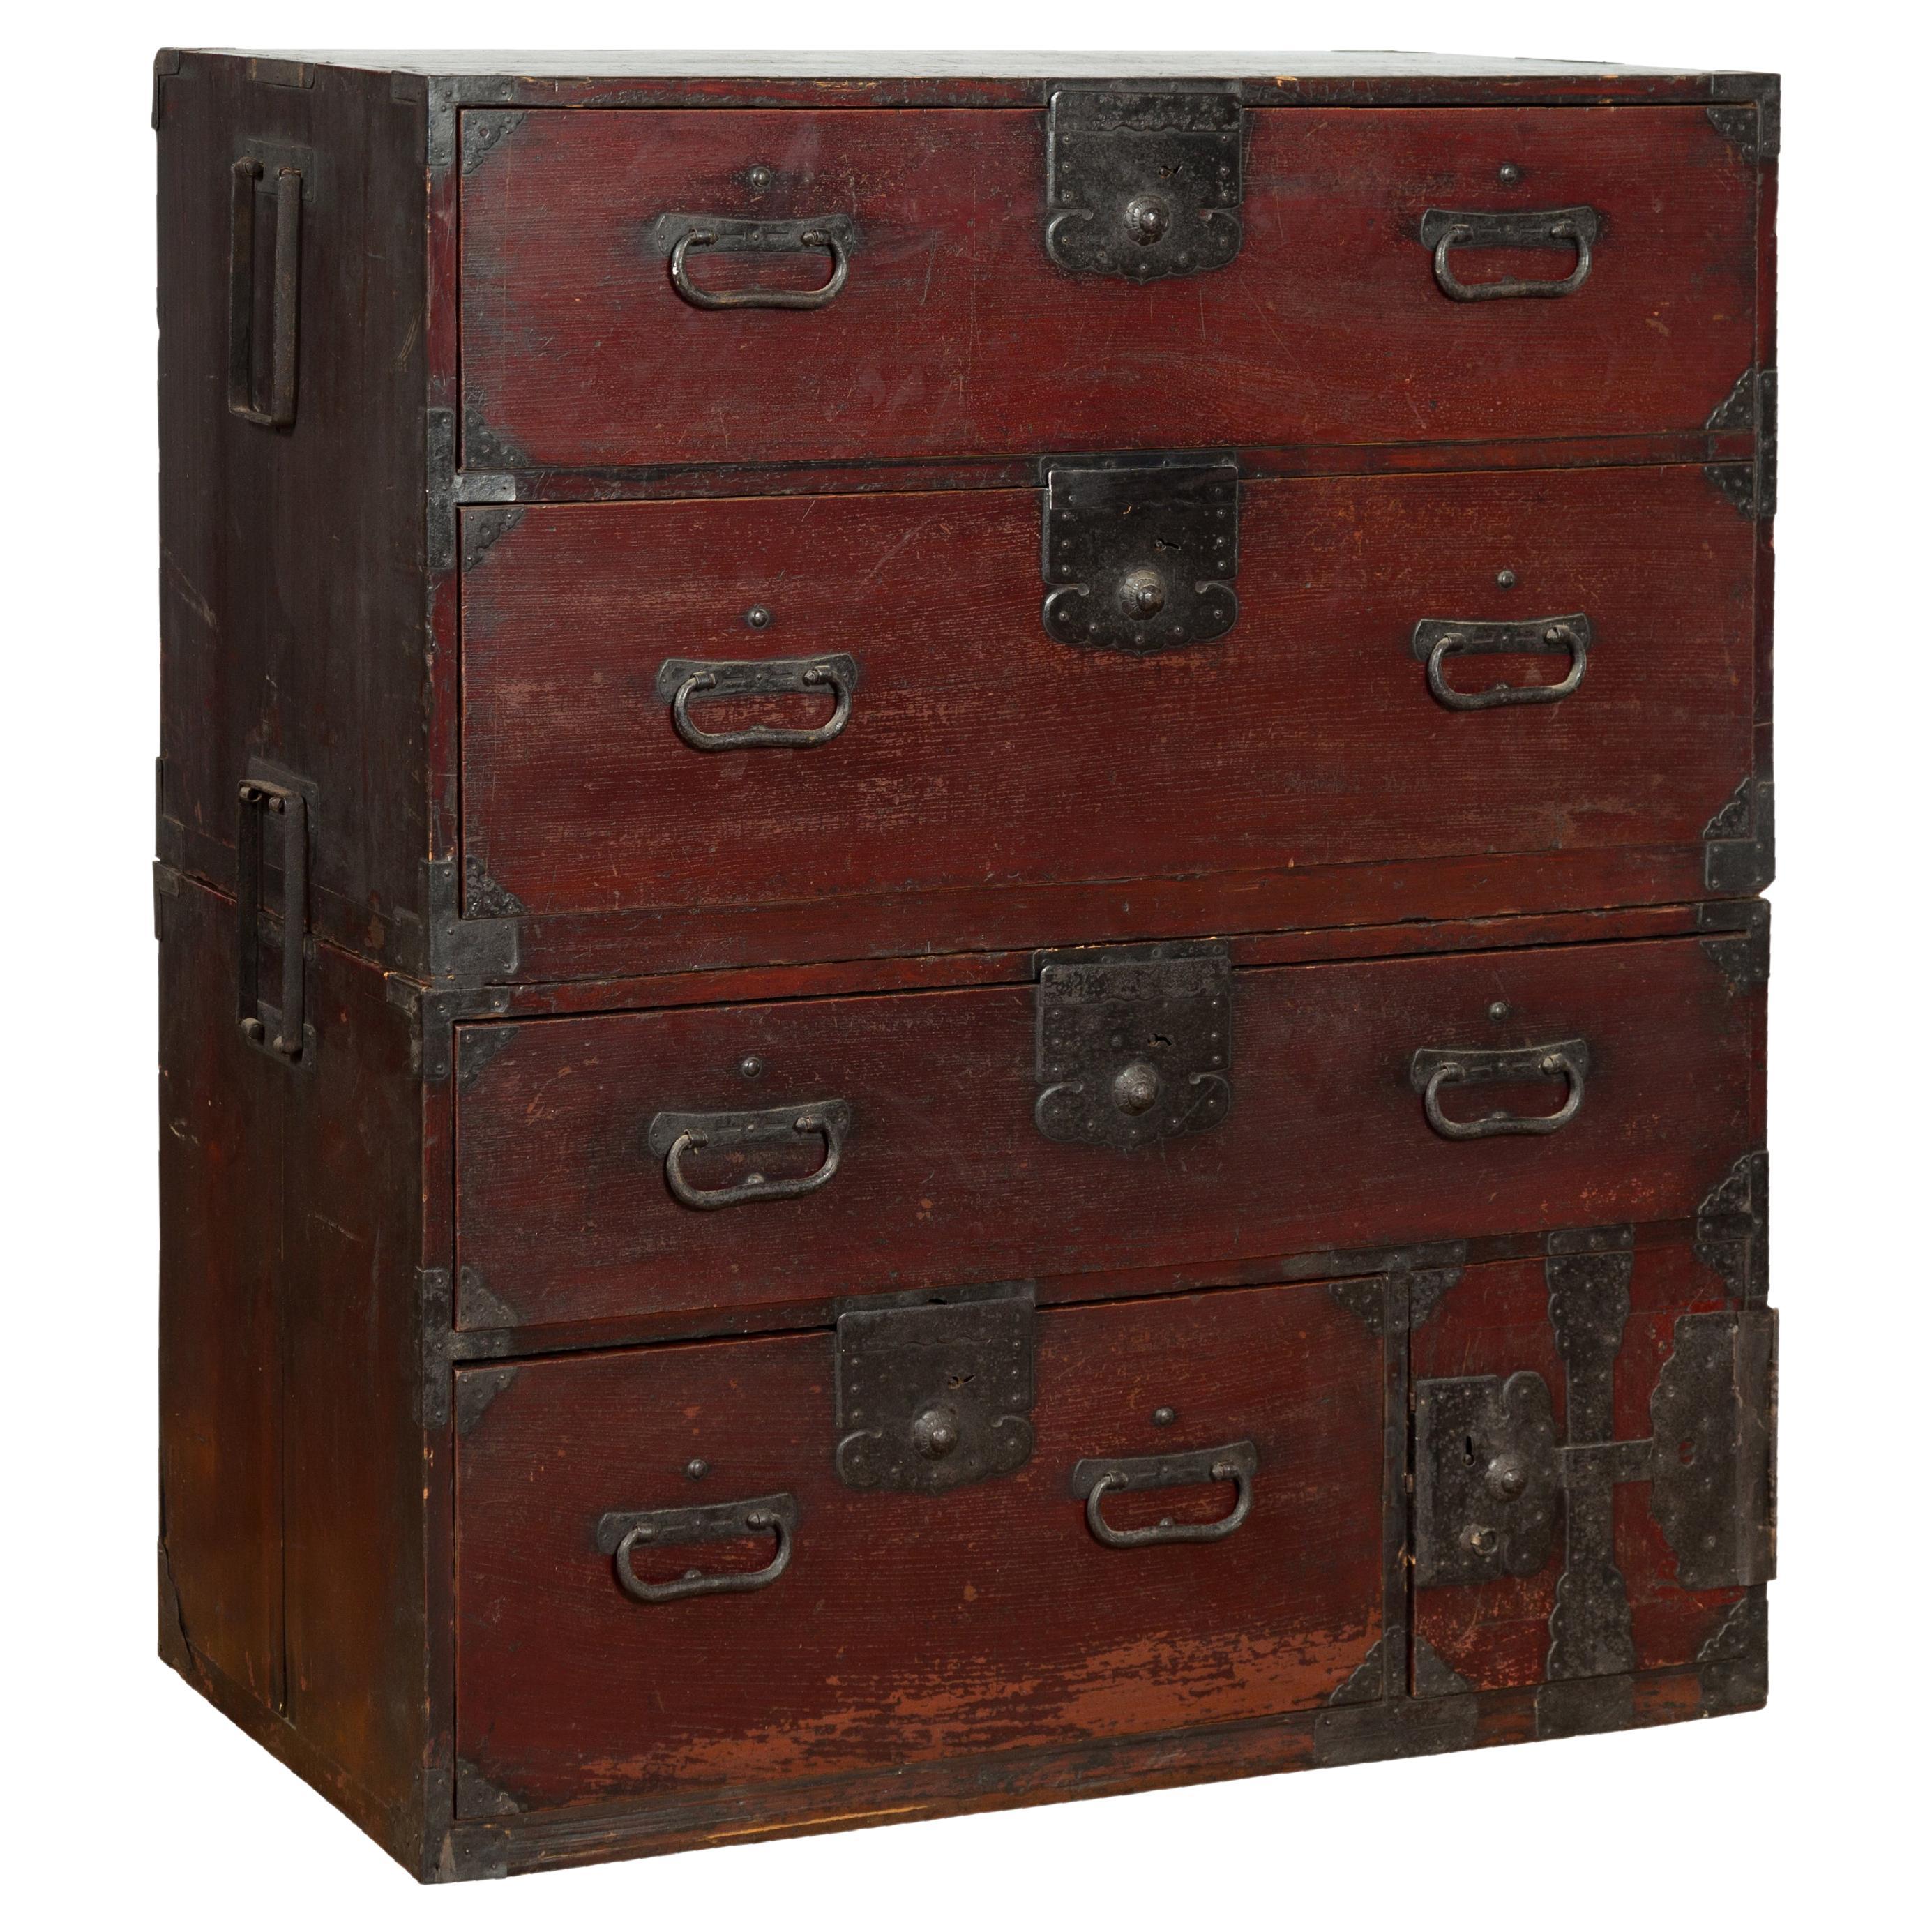 Japanese Meiji Period Late 19th Century Isho-Dansu Chest with Iron Hardware For Sale